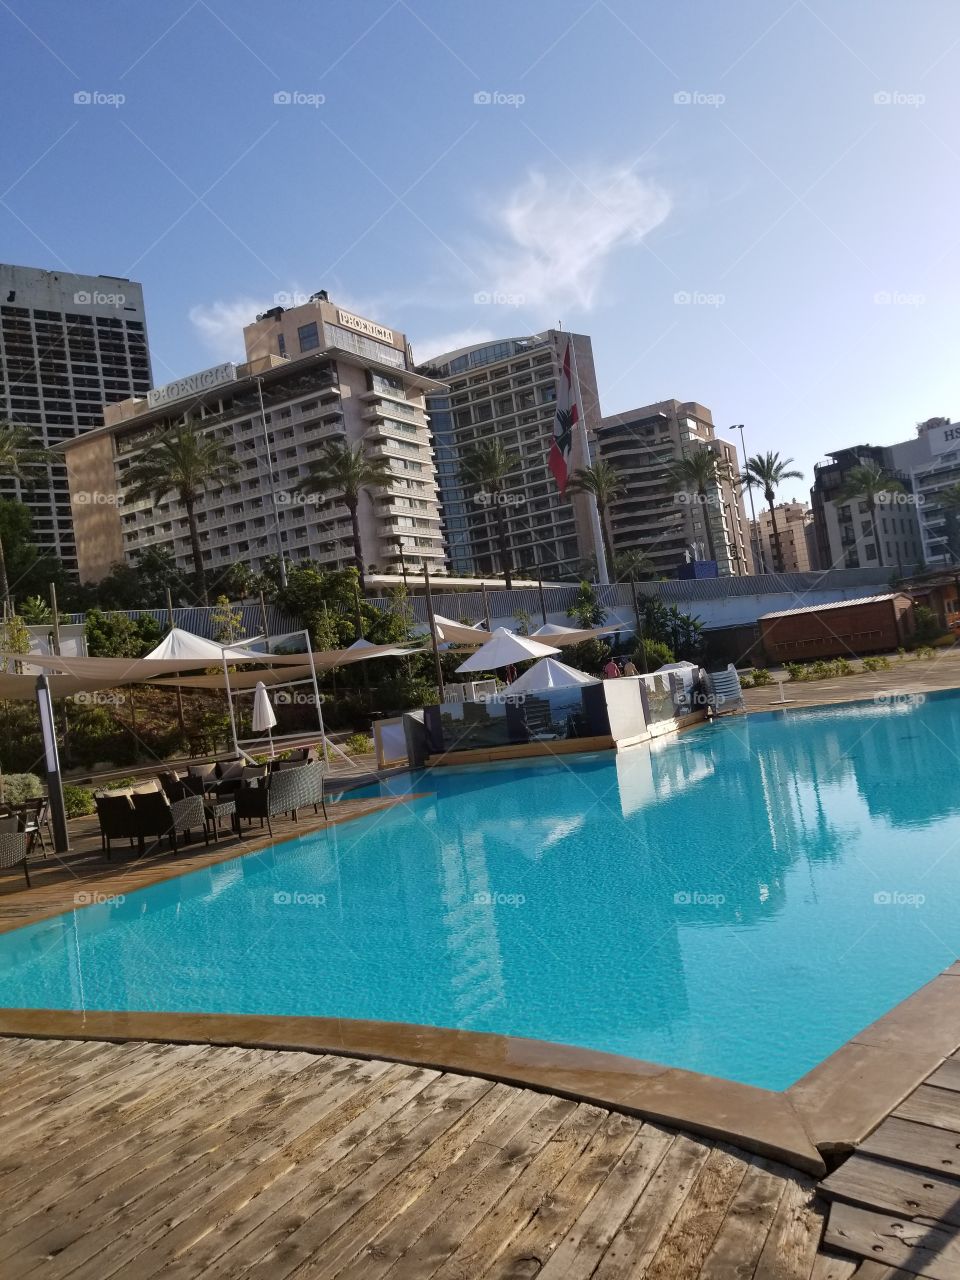 Pool in the city, in the middle heart of Town Beirut! The city that rose back from the ashes like a phoenix . Urban living at its finest. Live Live Lebanon